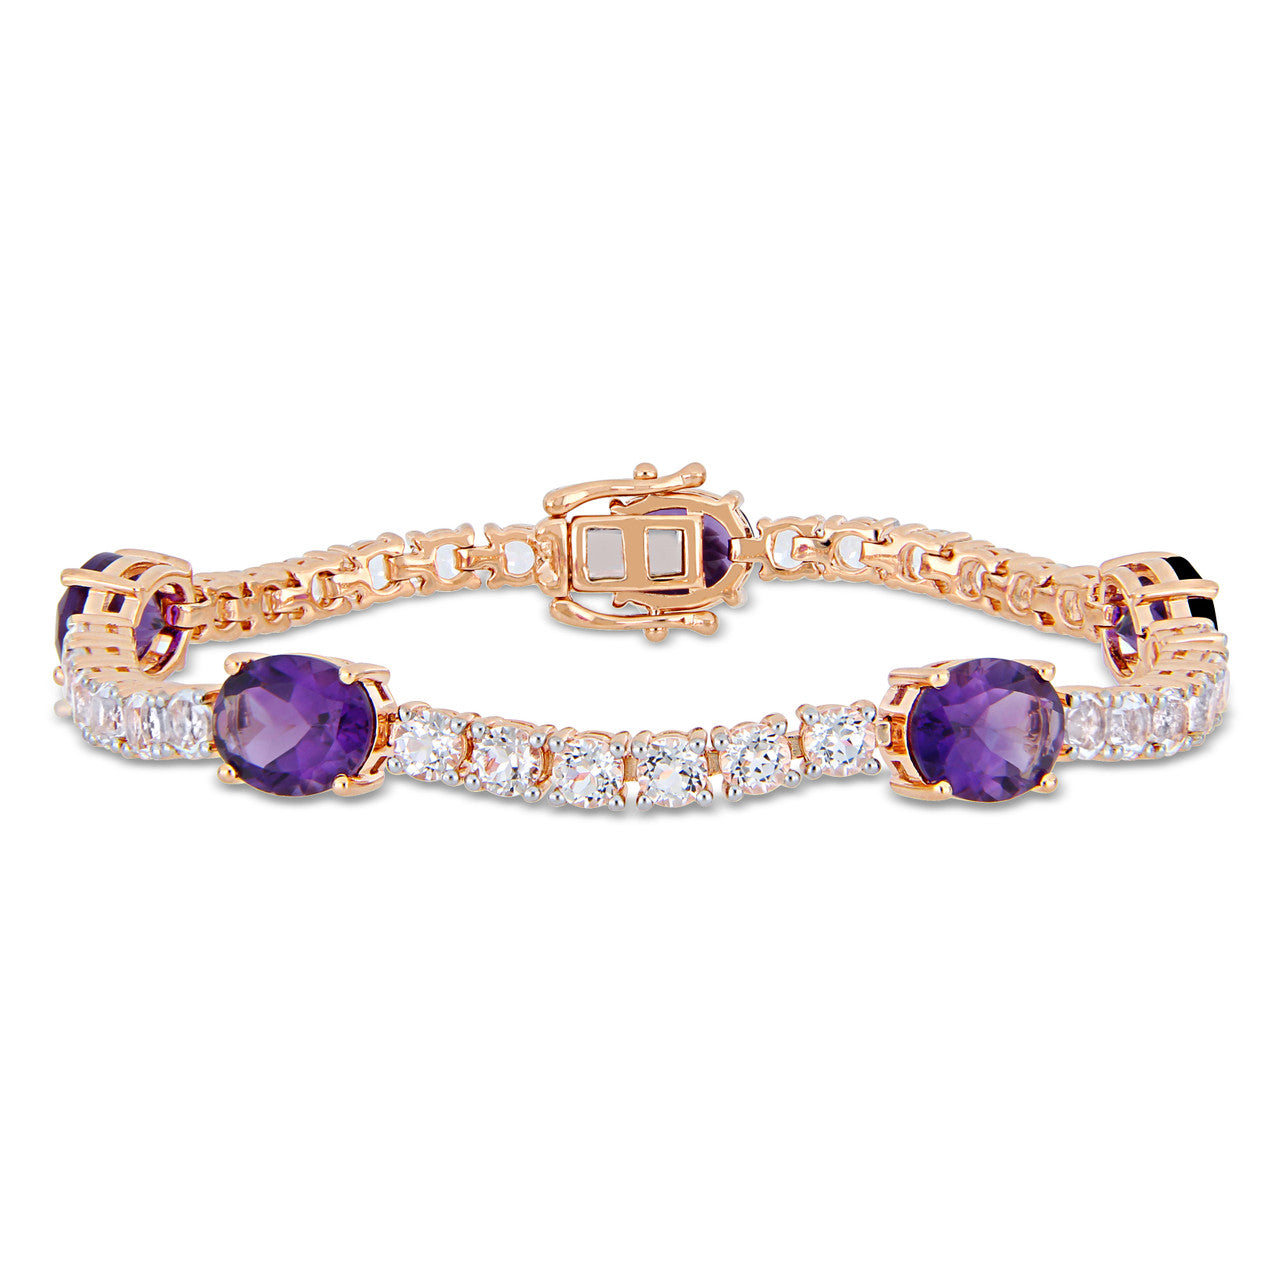 Ice Jewellery 21 CT TGW Africa-Amethyst & White Topaz Station Link Bracelet In Rose Gold Plated Sterling Silver - 75000004317 | Ice Jewellery Australia